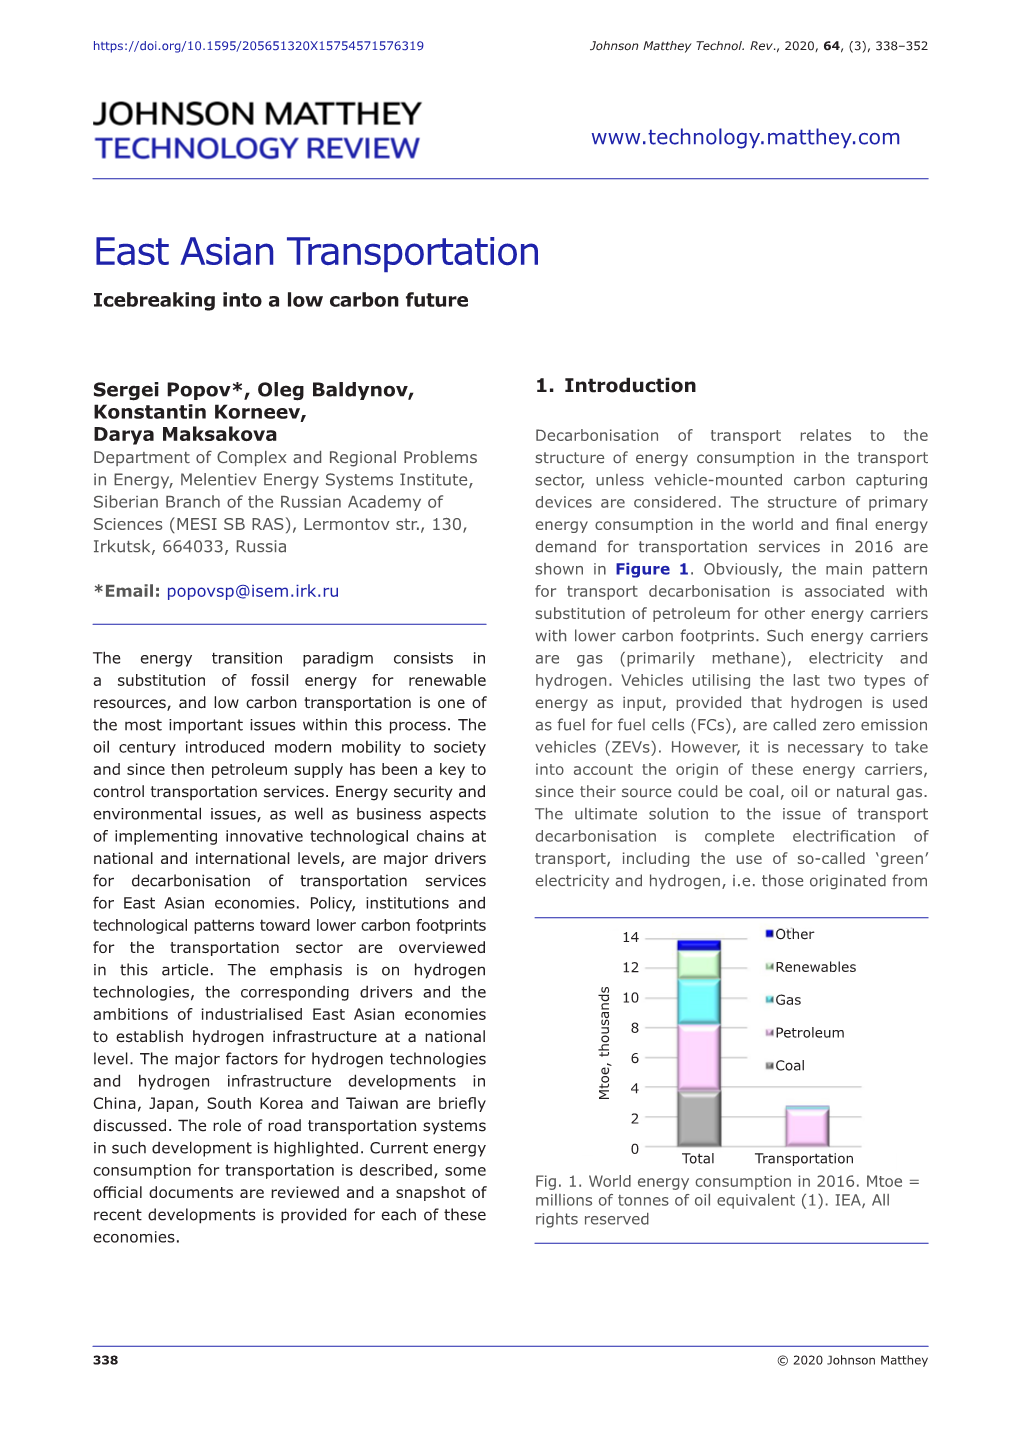 East Asian Transportation Icebreaking Into a Low Carbon Future